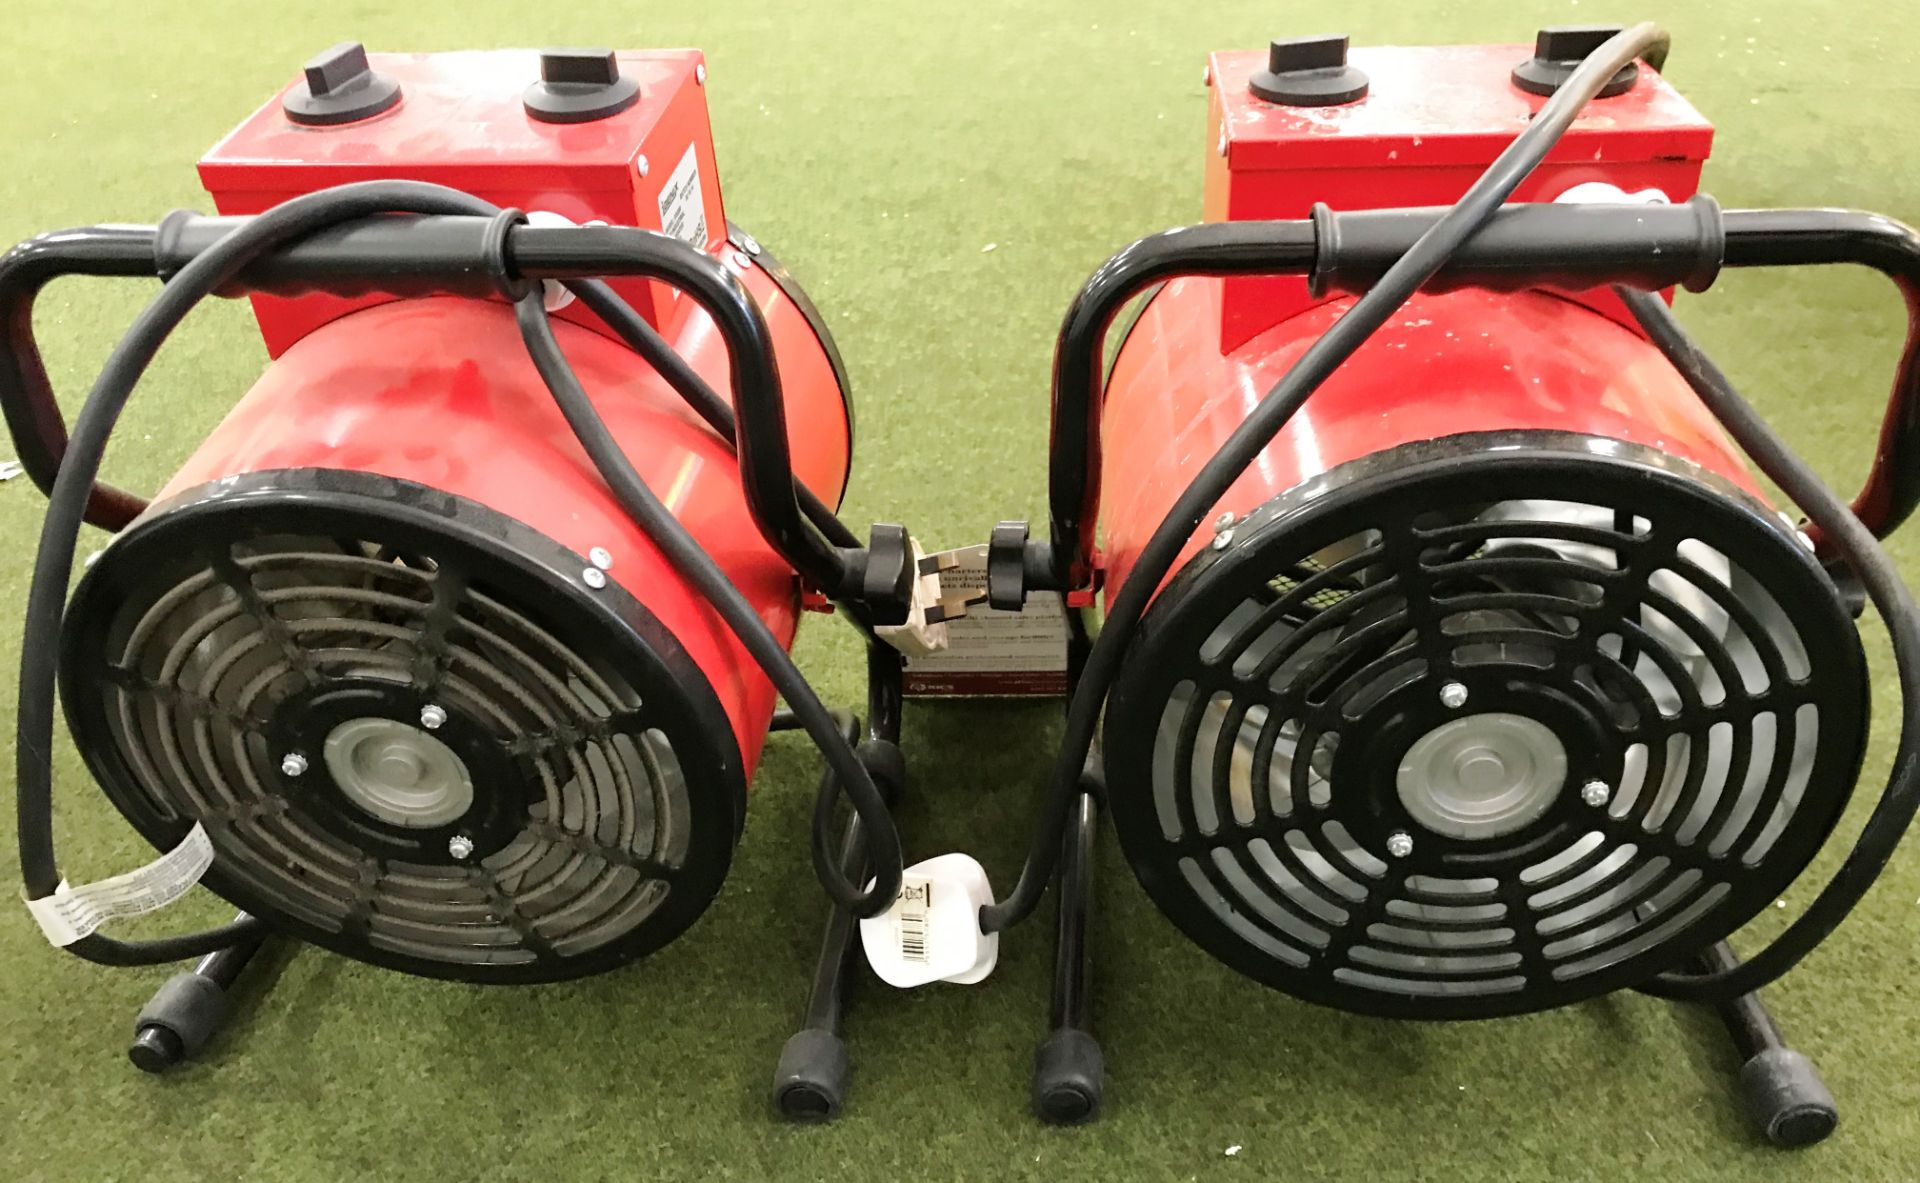 2 x Used Igenix IG9300 Commercial Drum Heater - Black/Red - RRP£79 - Image 3 of 3